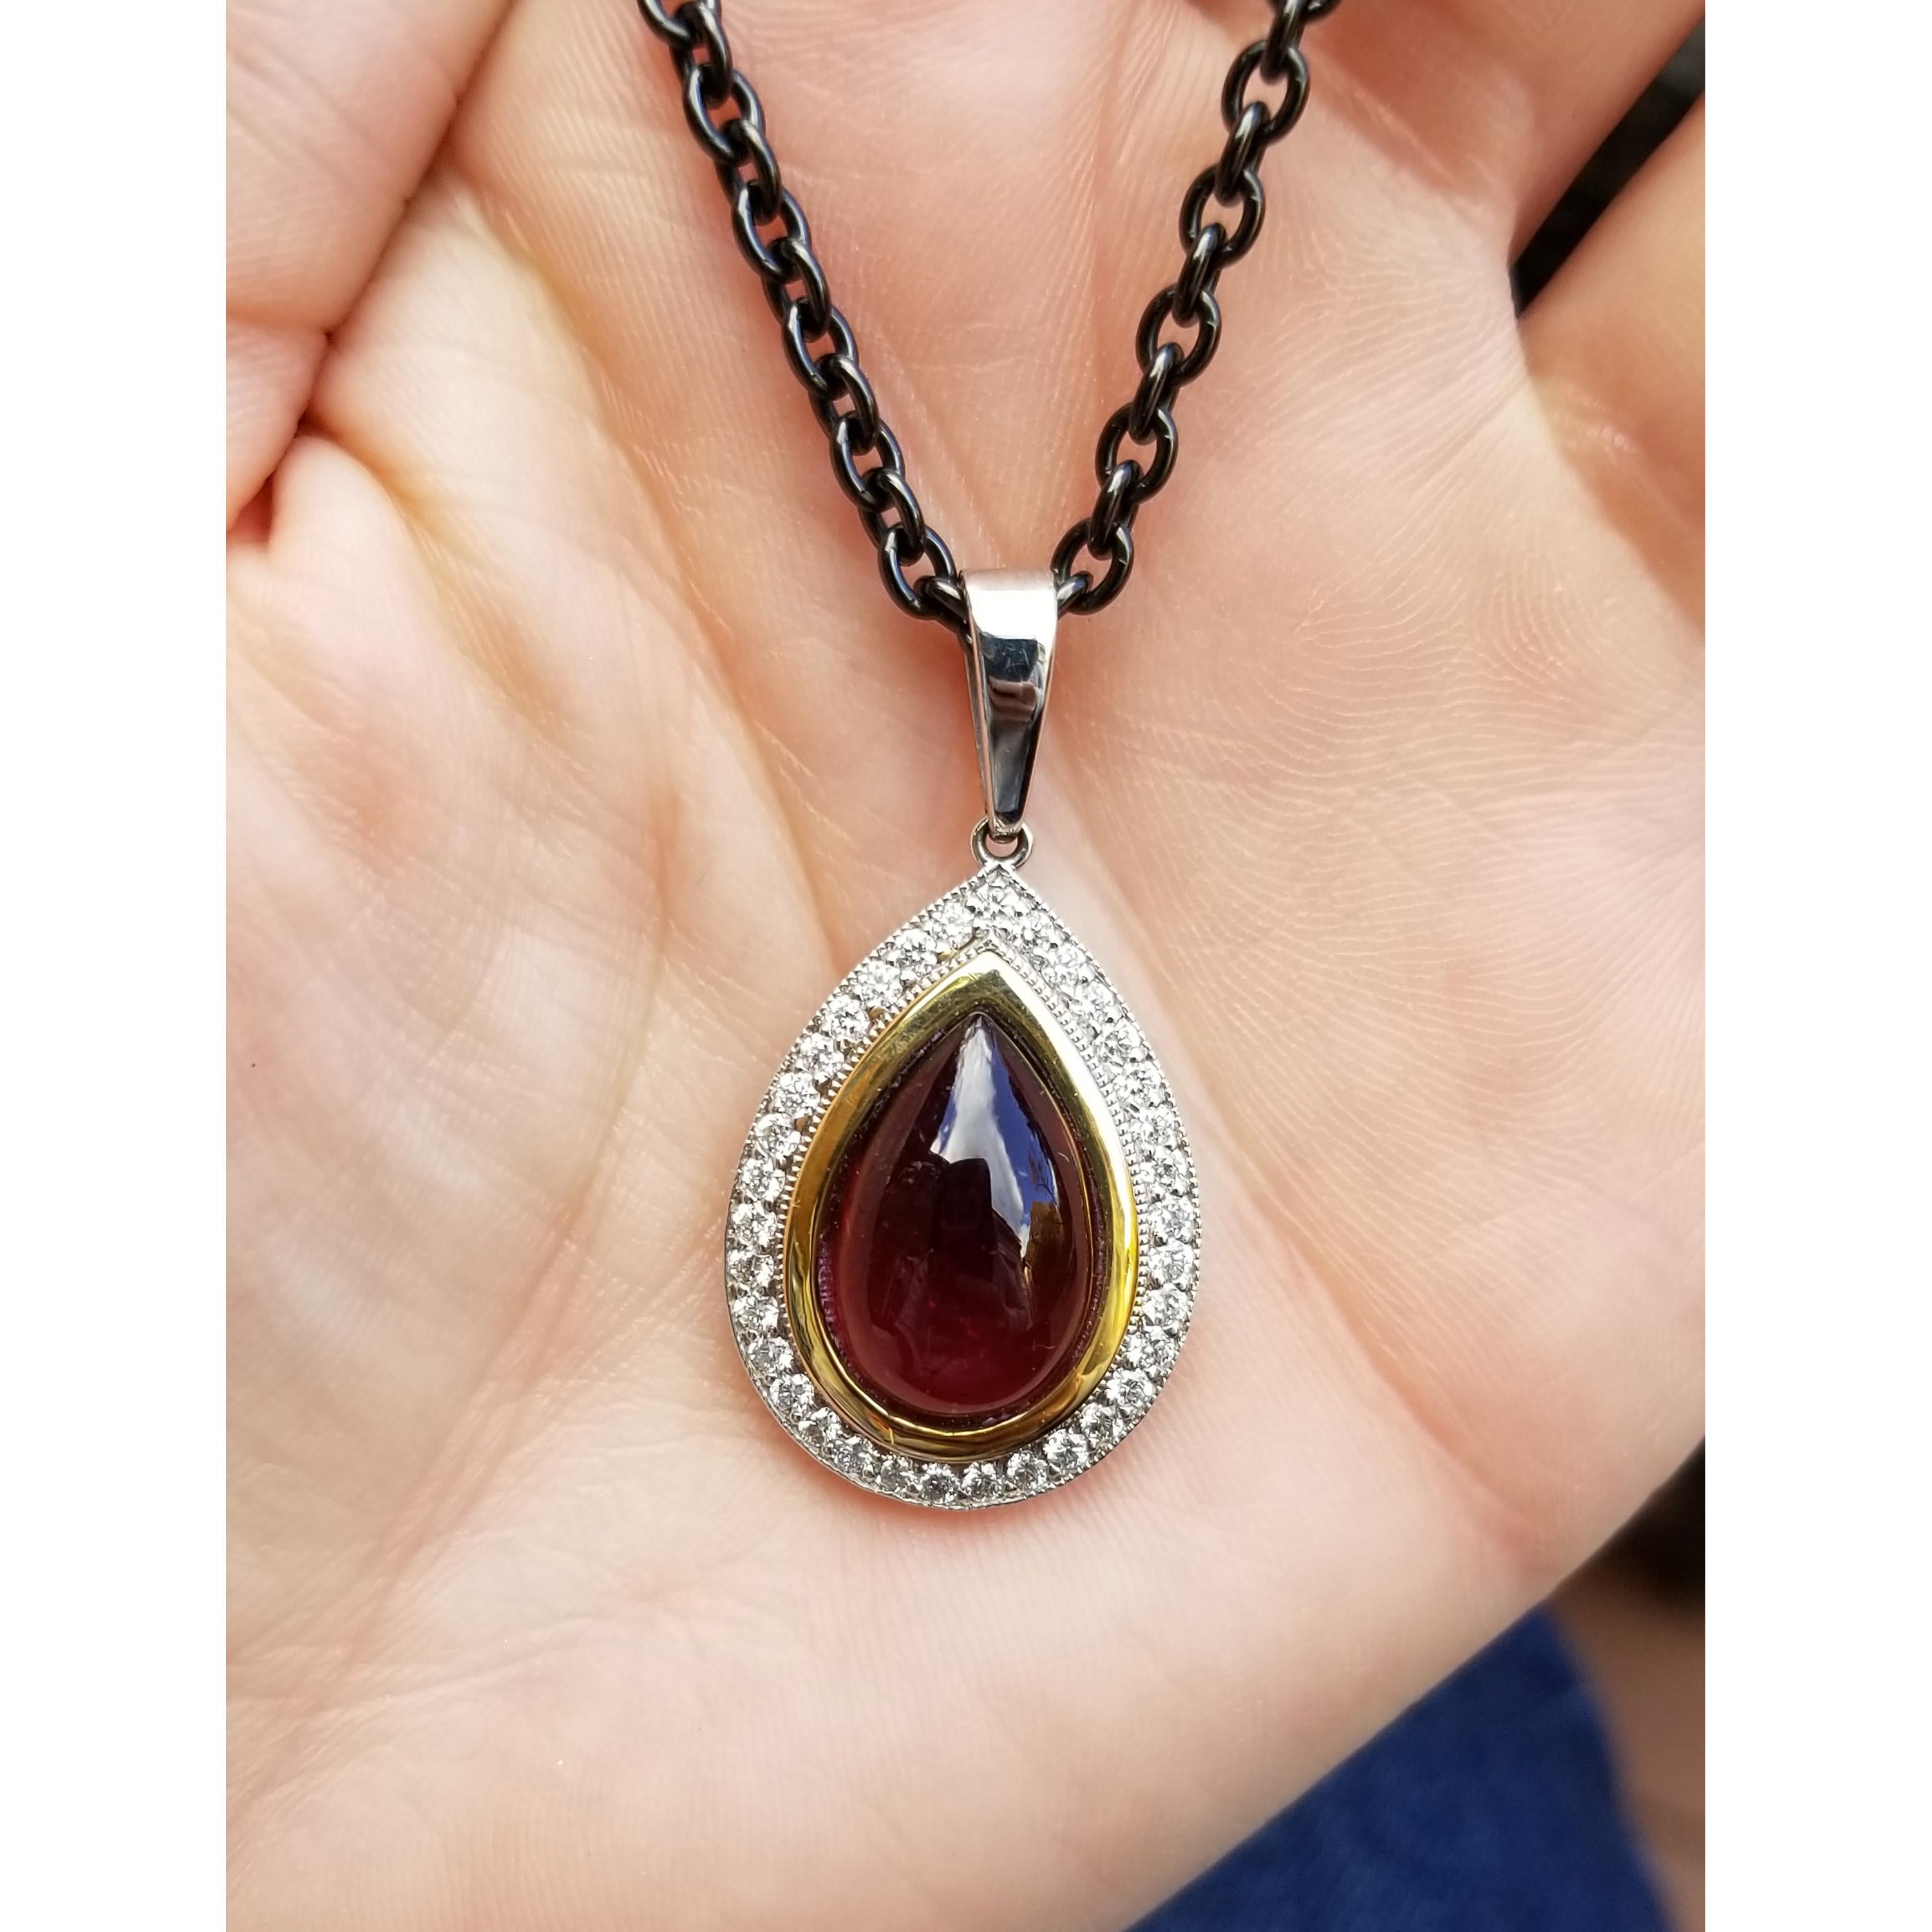 Richly saturated pinkish red tourmaline in pear-shaped cabochon is the statement making centerpiece of this candy-hued pendant necklace.

This elegantly pared-down pendant was designed to perfectly frame the center tourmaline. The clean and sharp